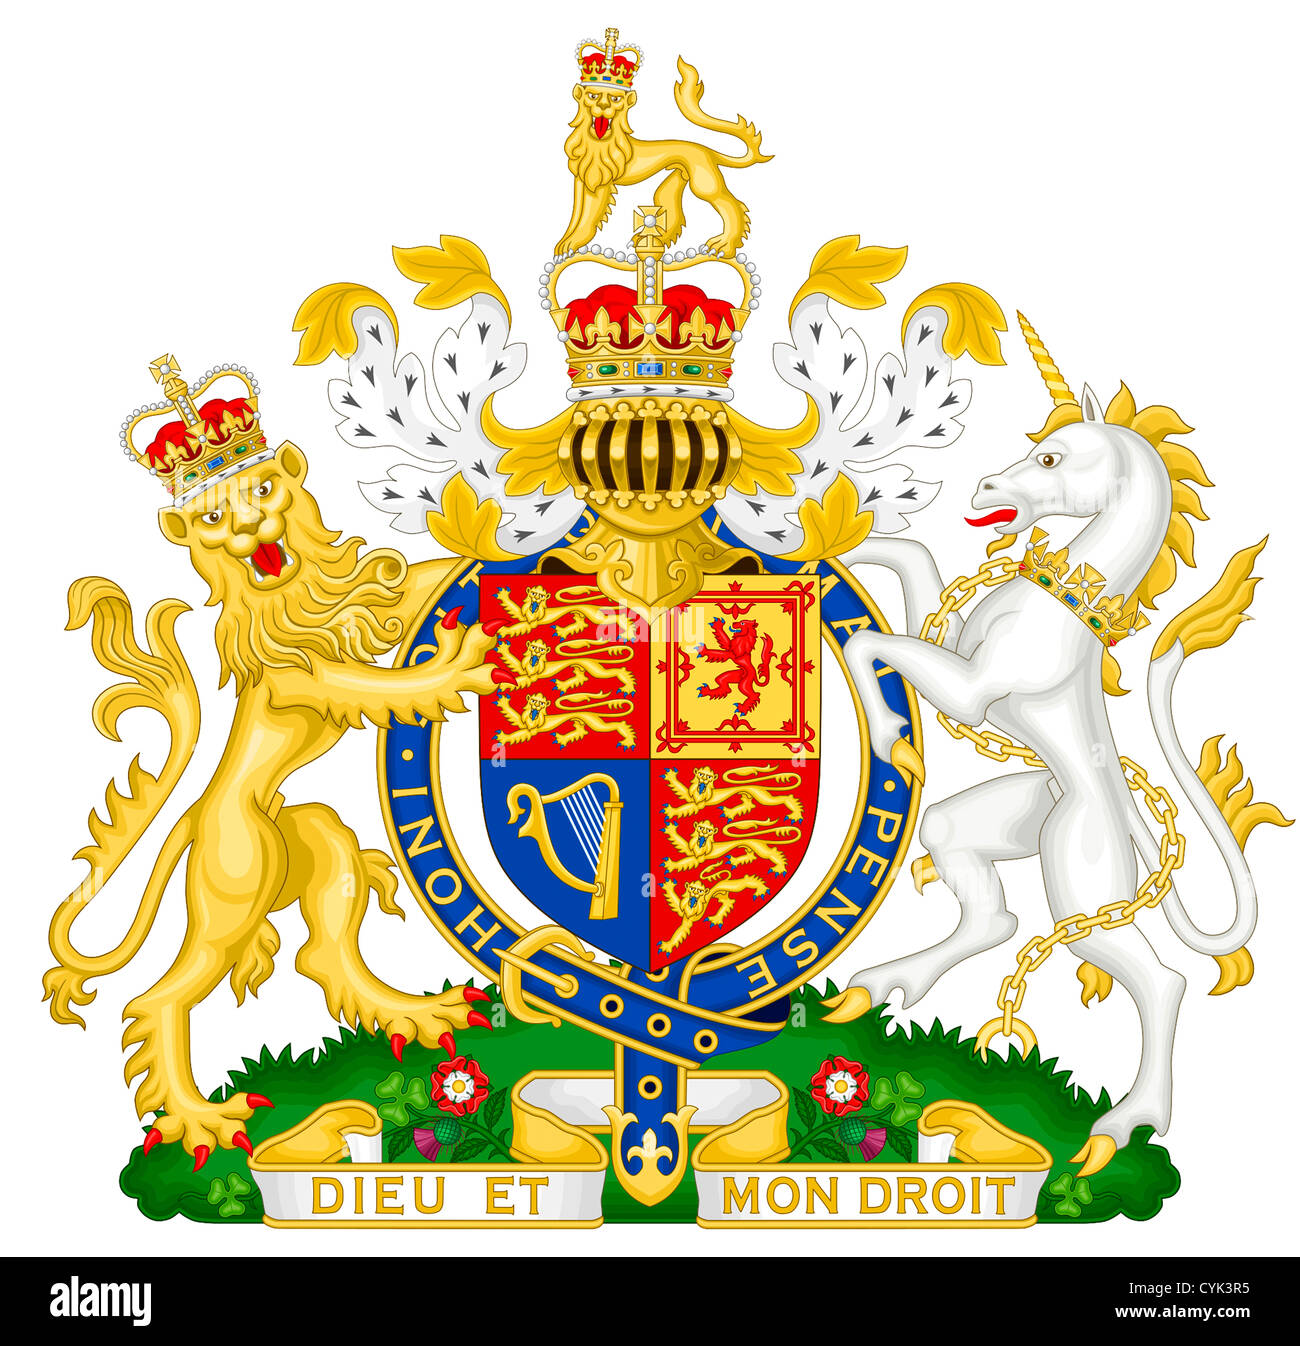 Coat of arms of the United Kingdom of Great Britain and Northern Ireland. Stock Photo